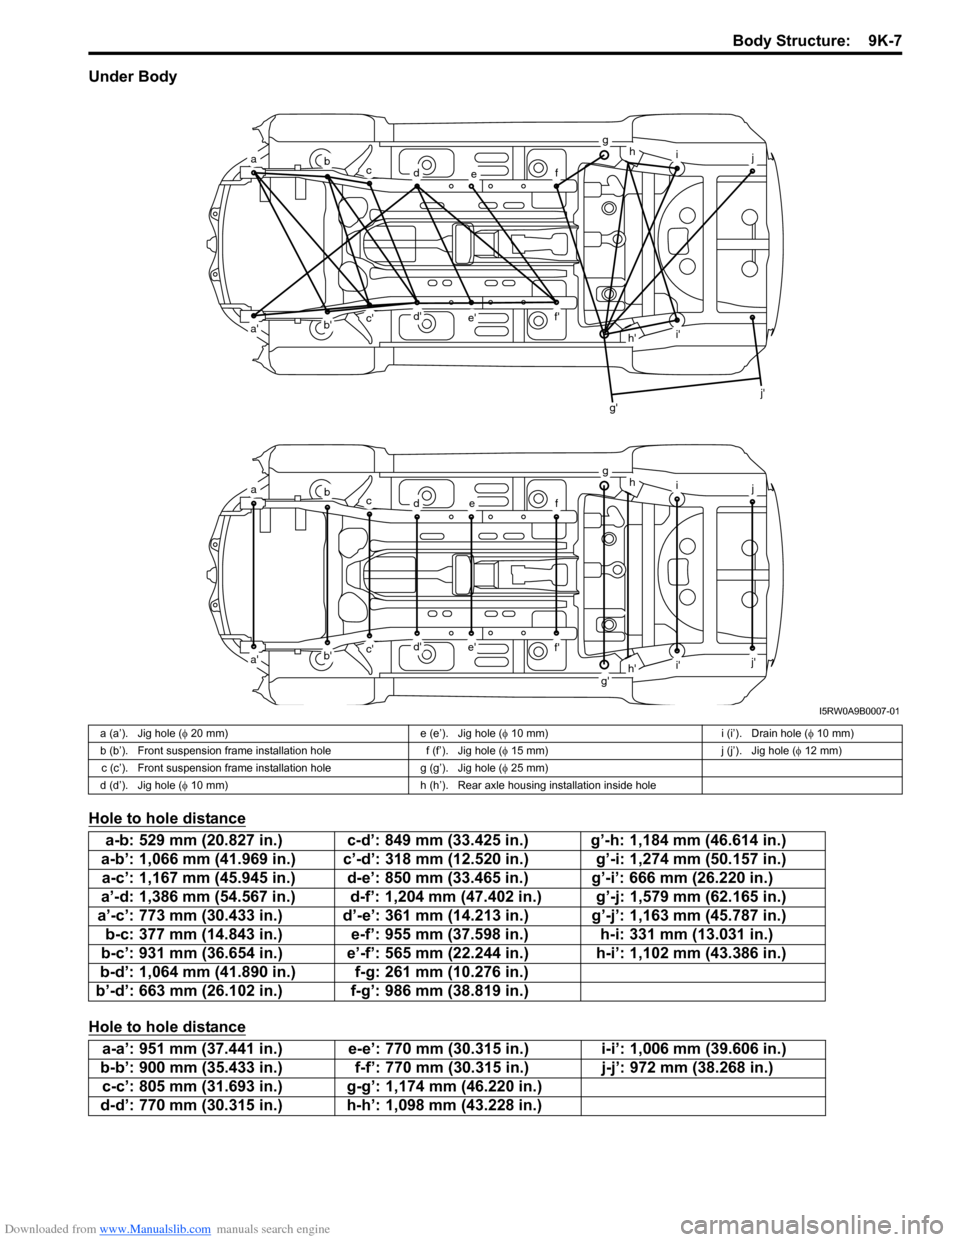 SUZUKI SX4 2006 1.G Service Owners Guide Downloaded from www.Manualslib.com manuals search engine Body Structure:  9K-7
Under Body
Hole to hole distance
Hole to hole distance
abcdef
ghij
abcdef
g
hi
j
abcdef
ghij
abcdef
ghi